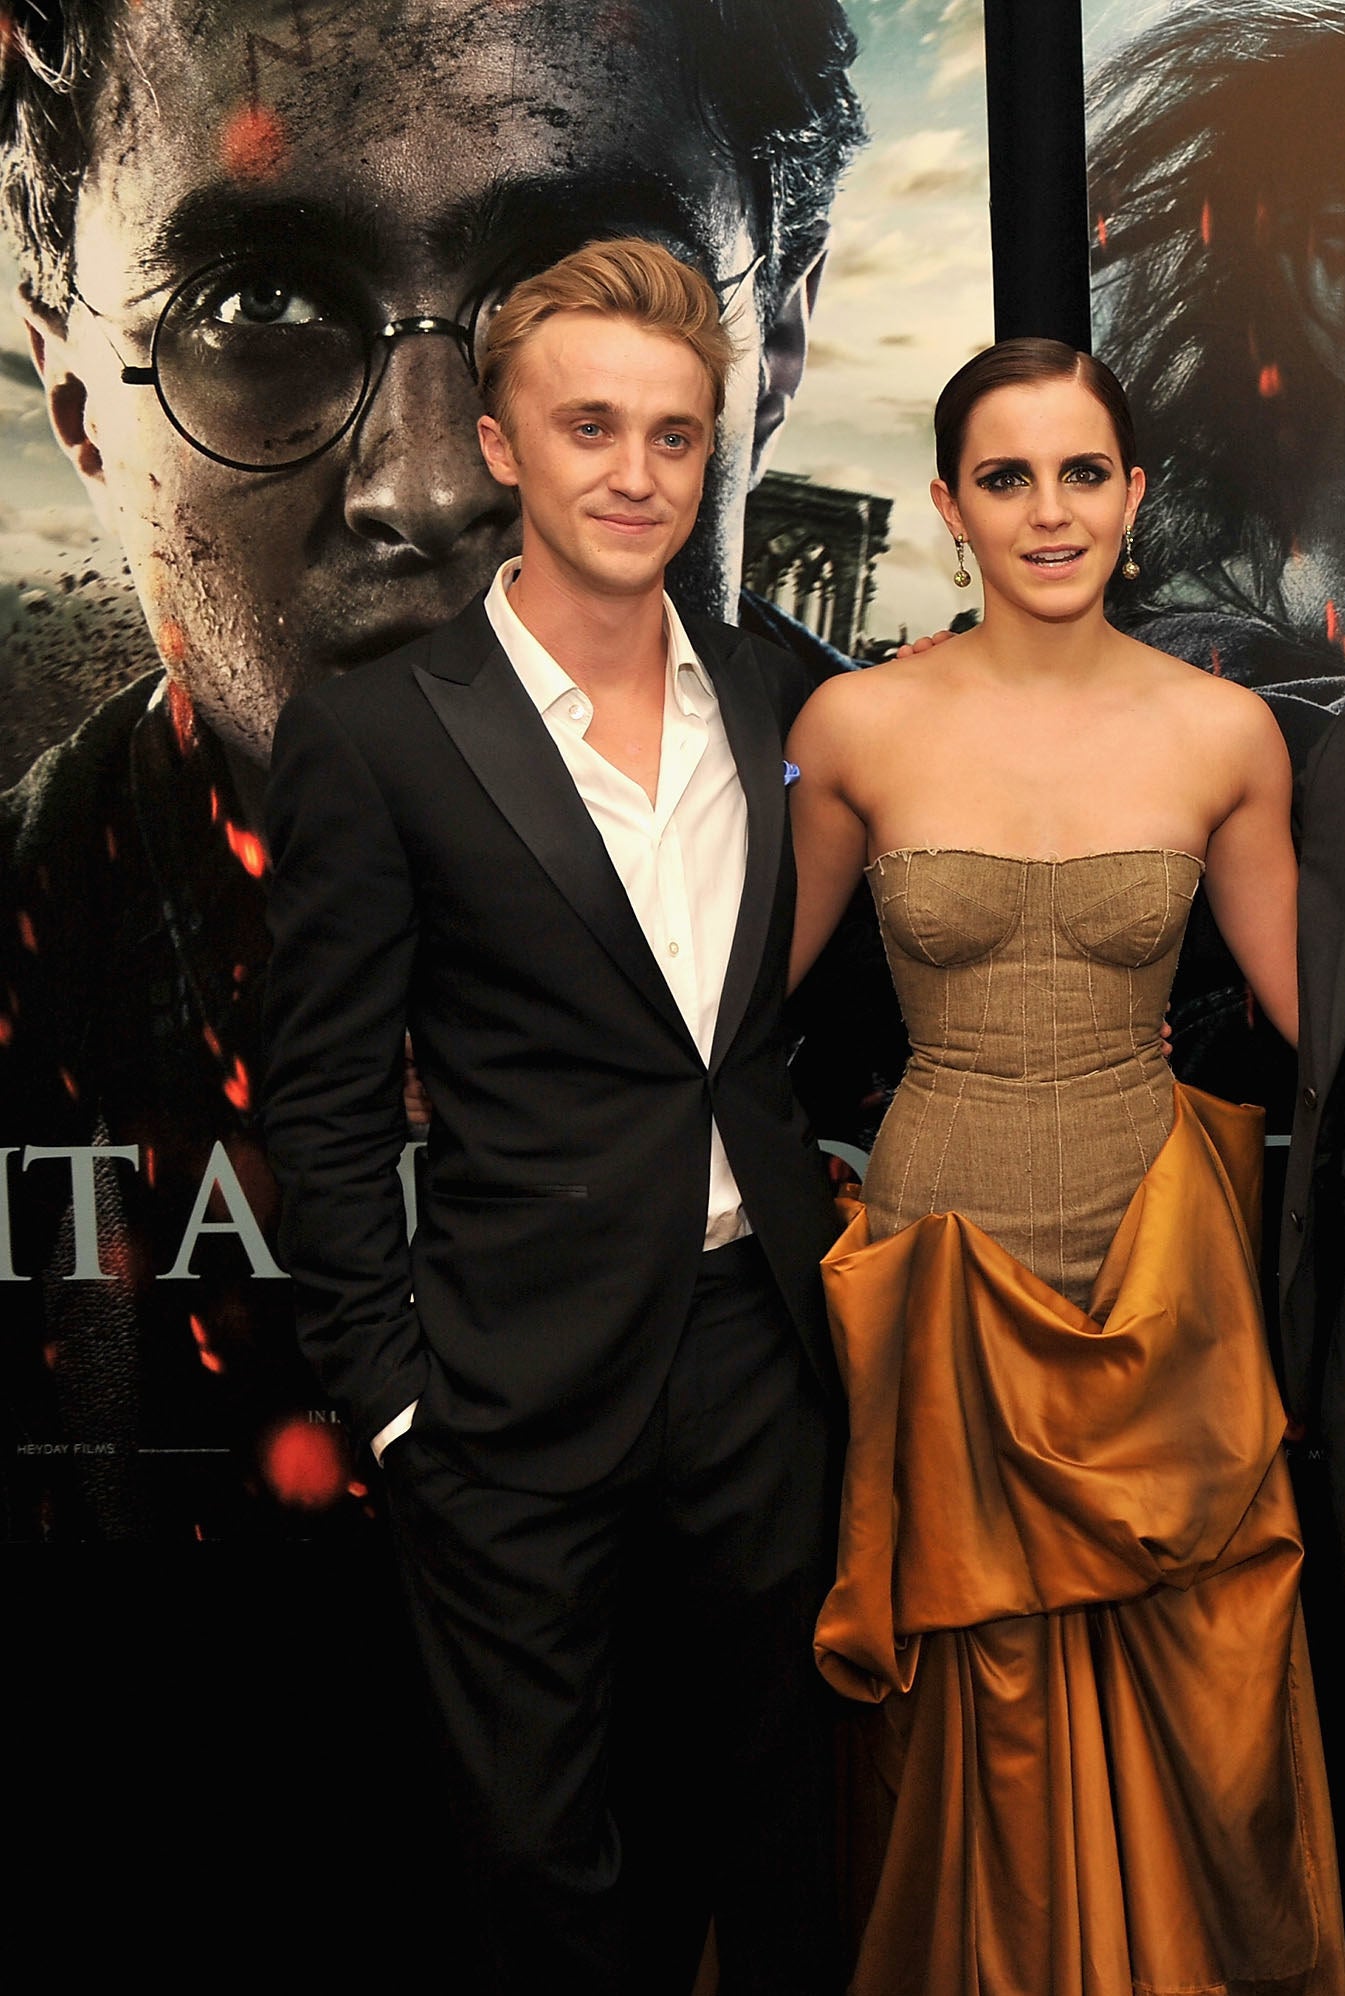 Tom and Emma pose together on the red carpet